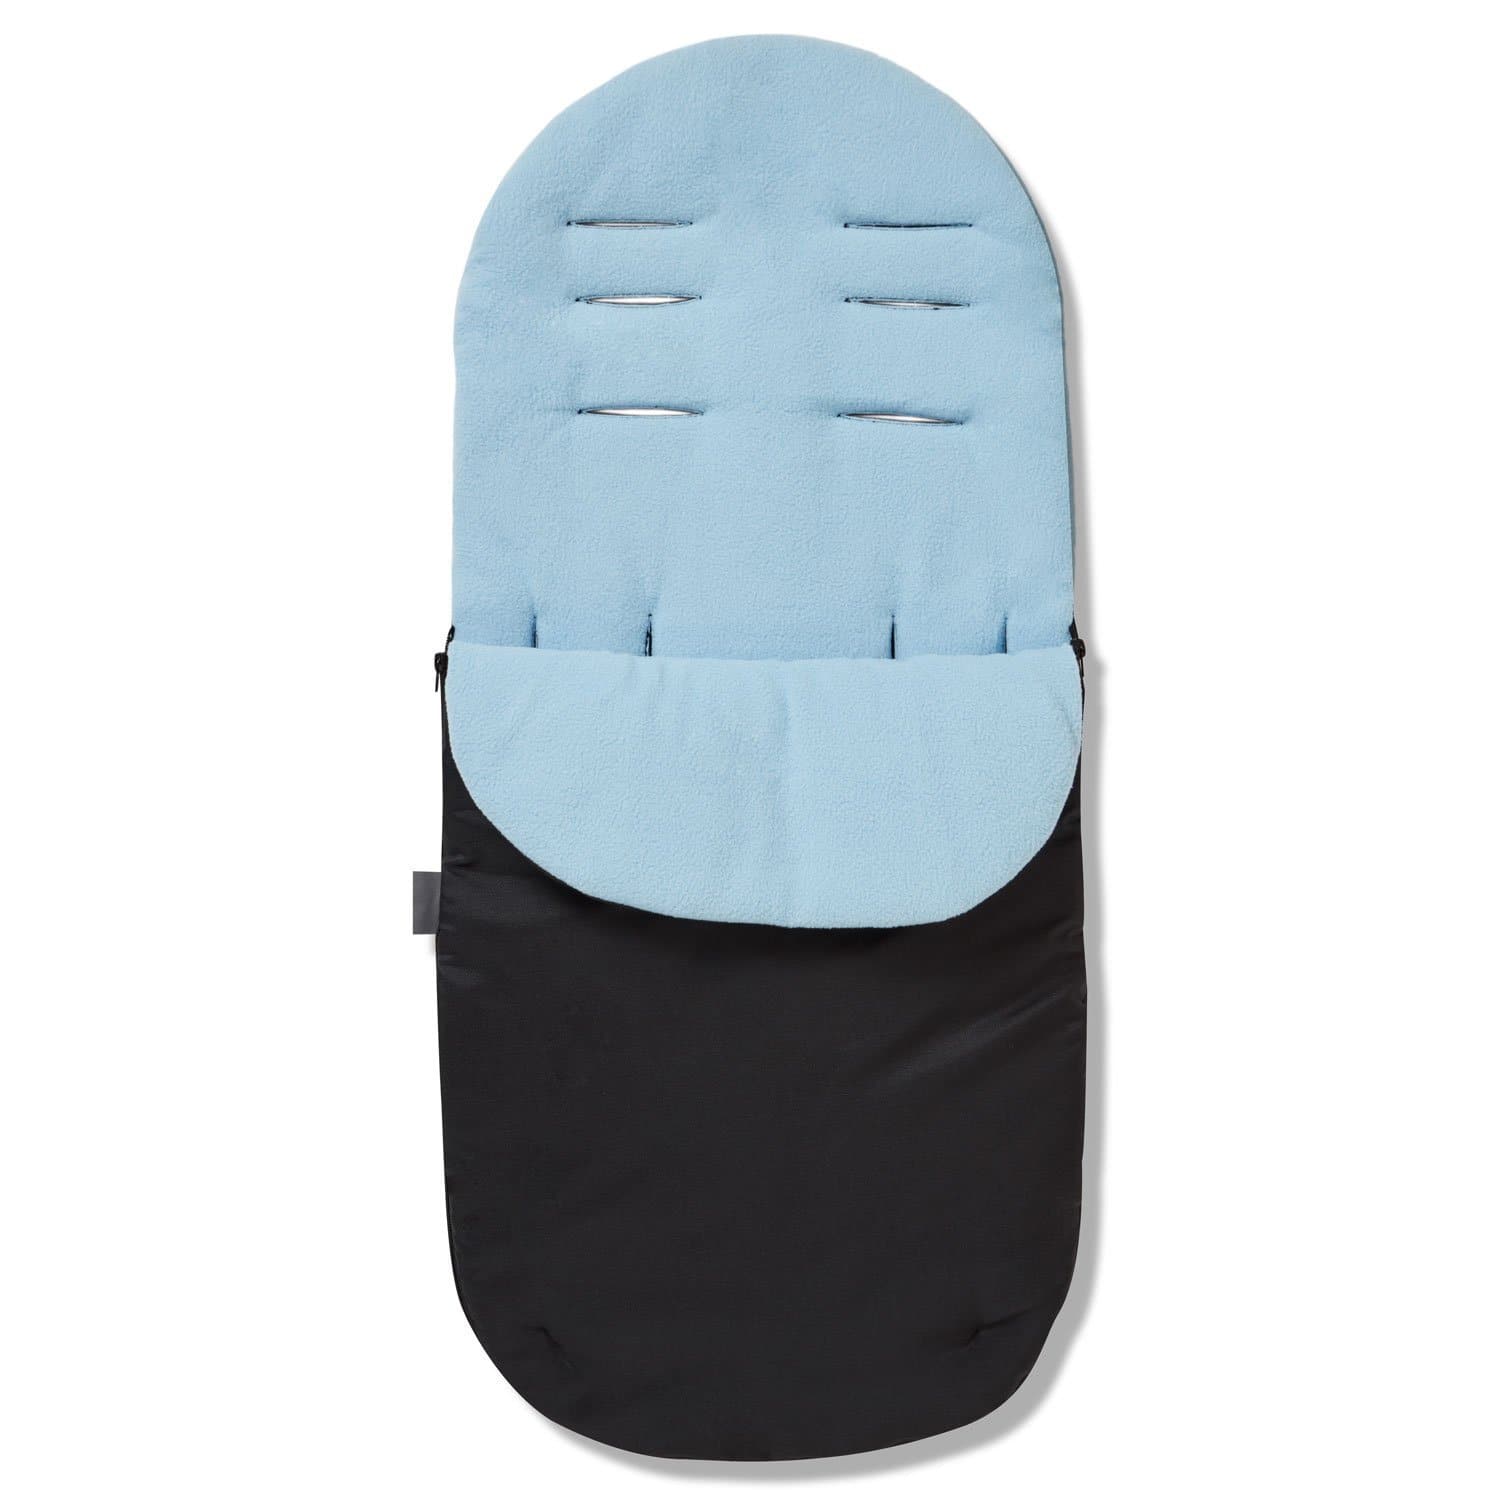 Footmuff / Cosy Toes Compatible with Inglesina - For Your Little One